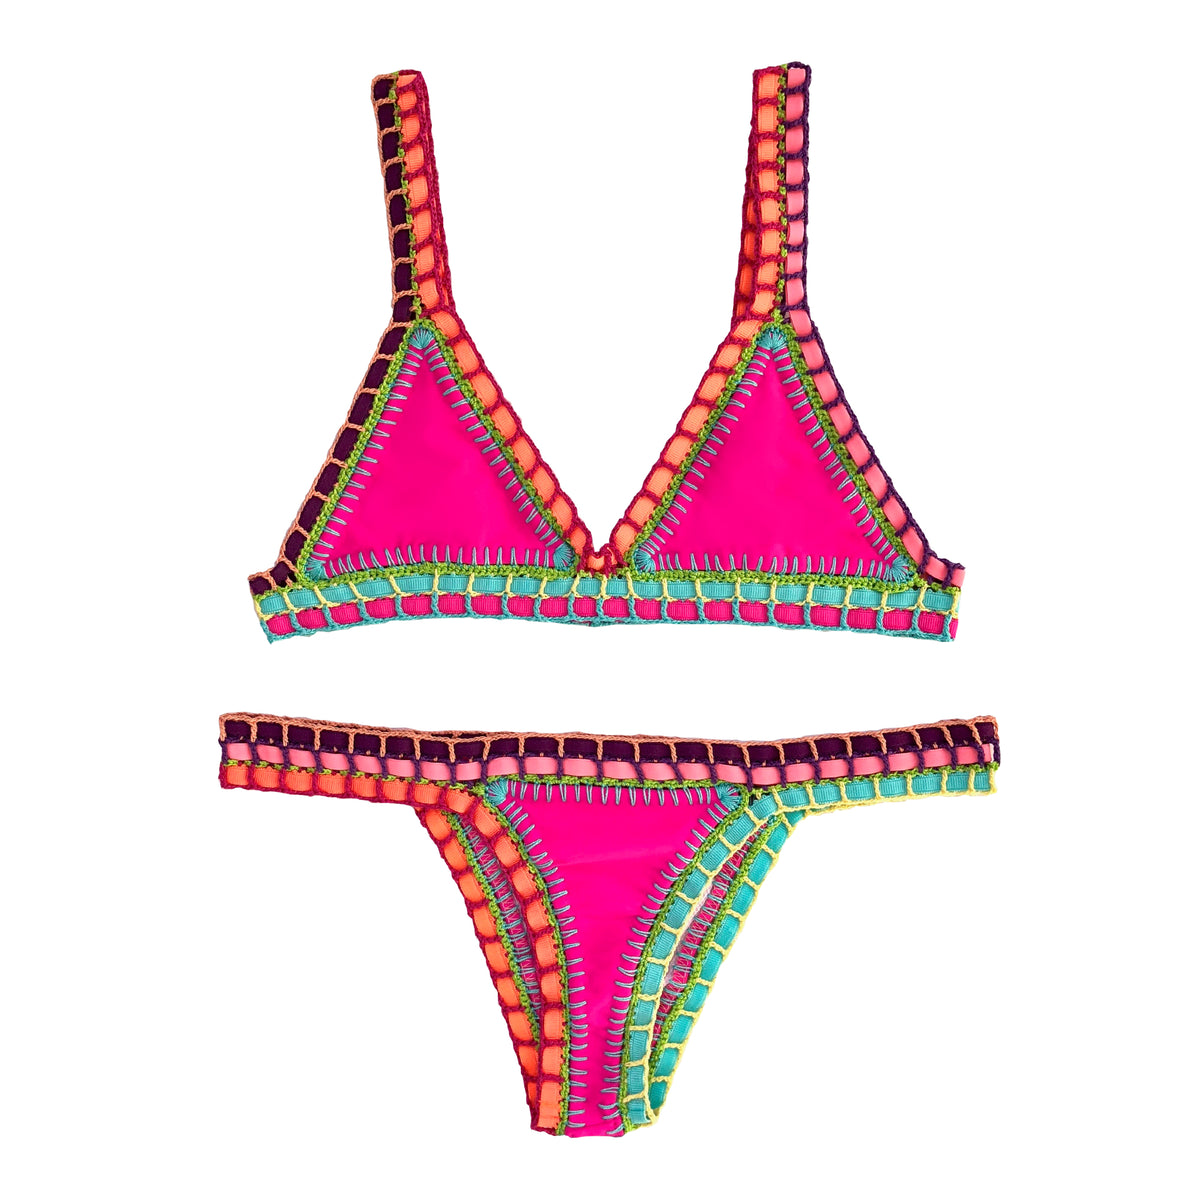 PINK NHABY – Coccoloba Swimwear